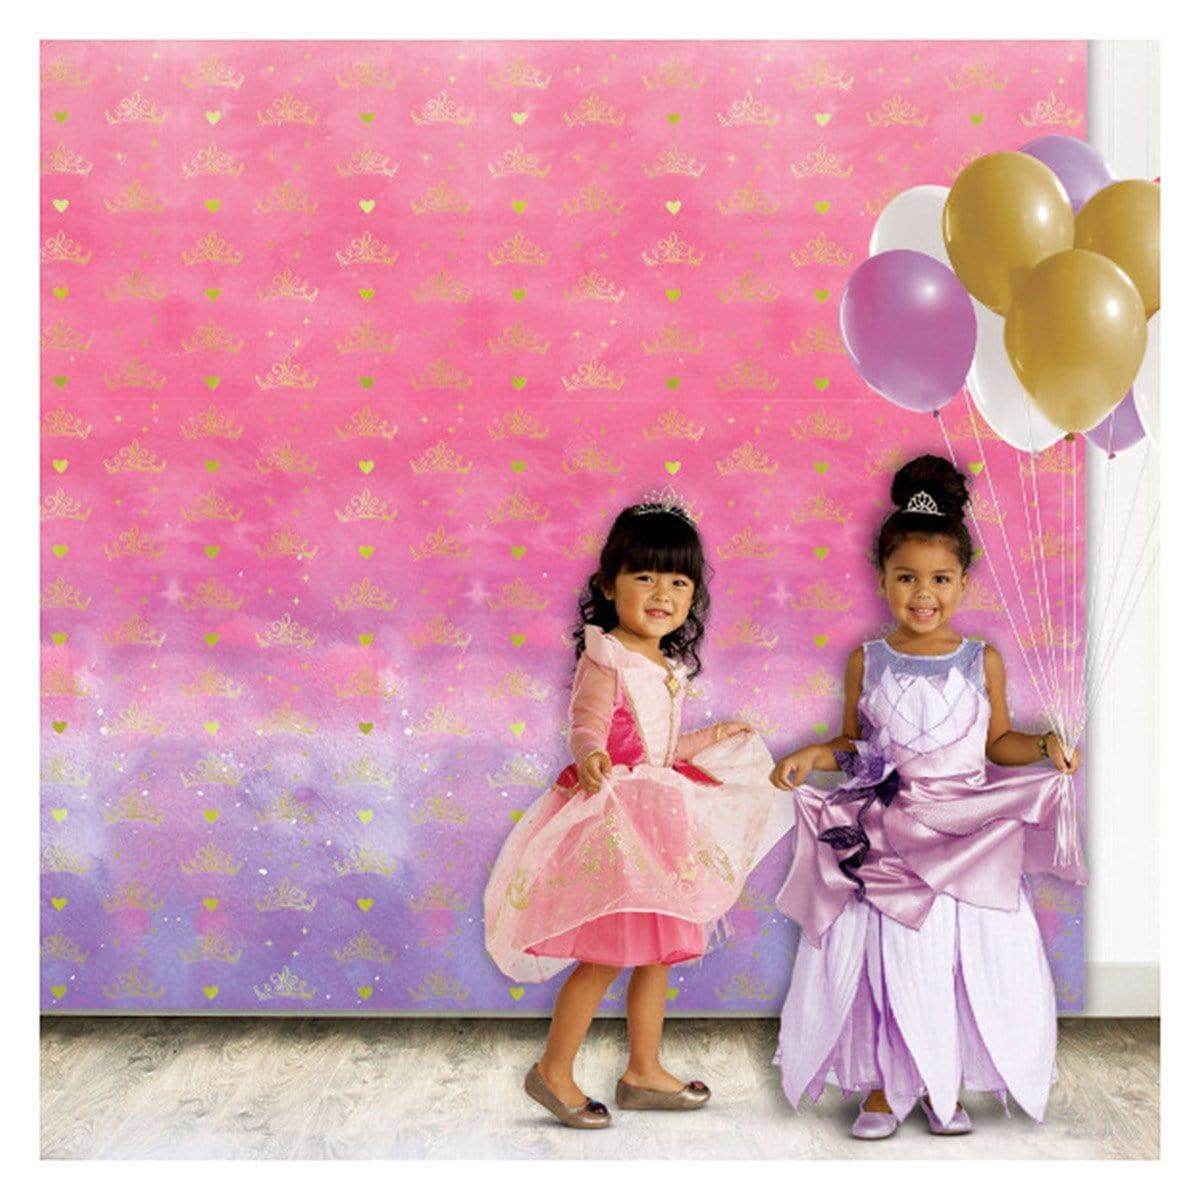 Buy Kids Birthday Once Upon A Time photo backdrop sold at Party Expert